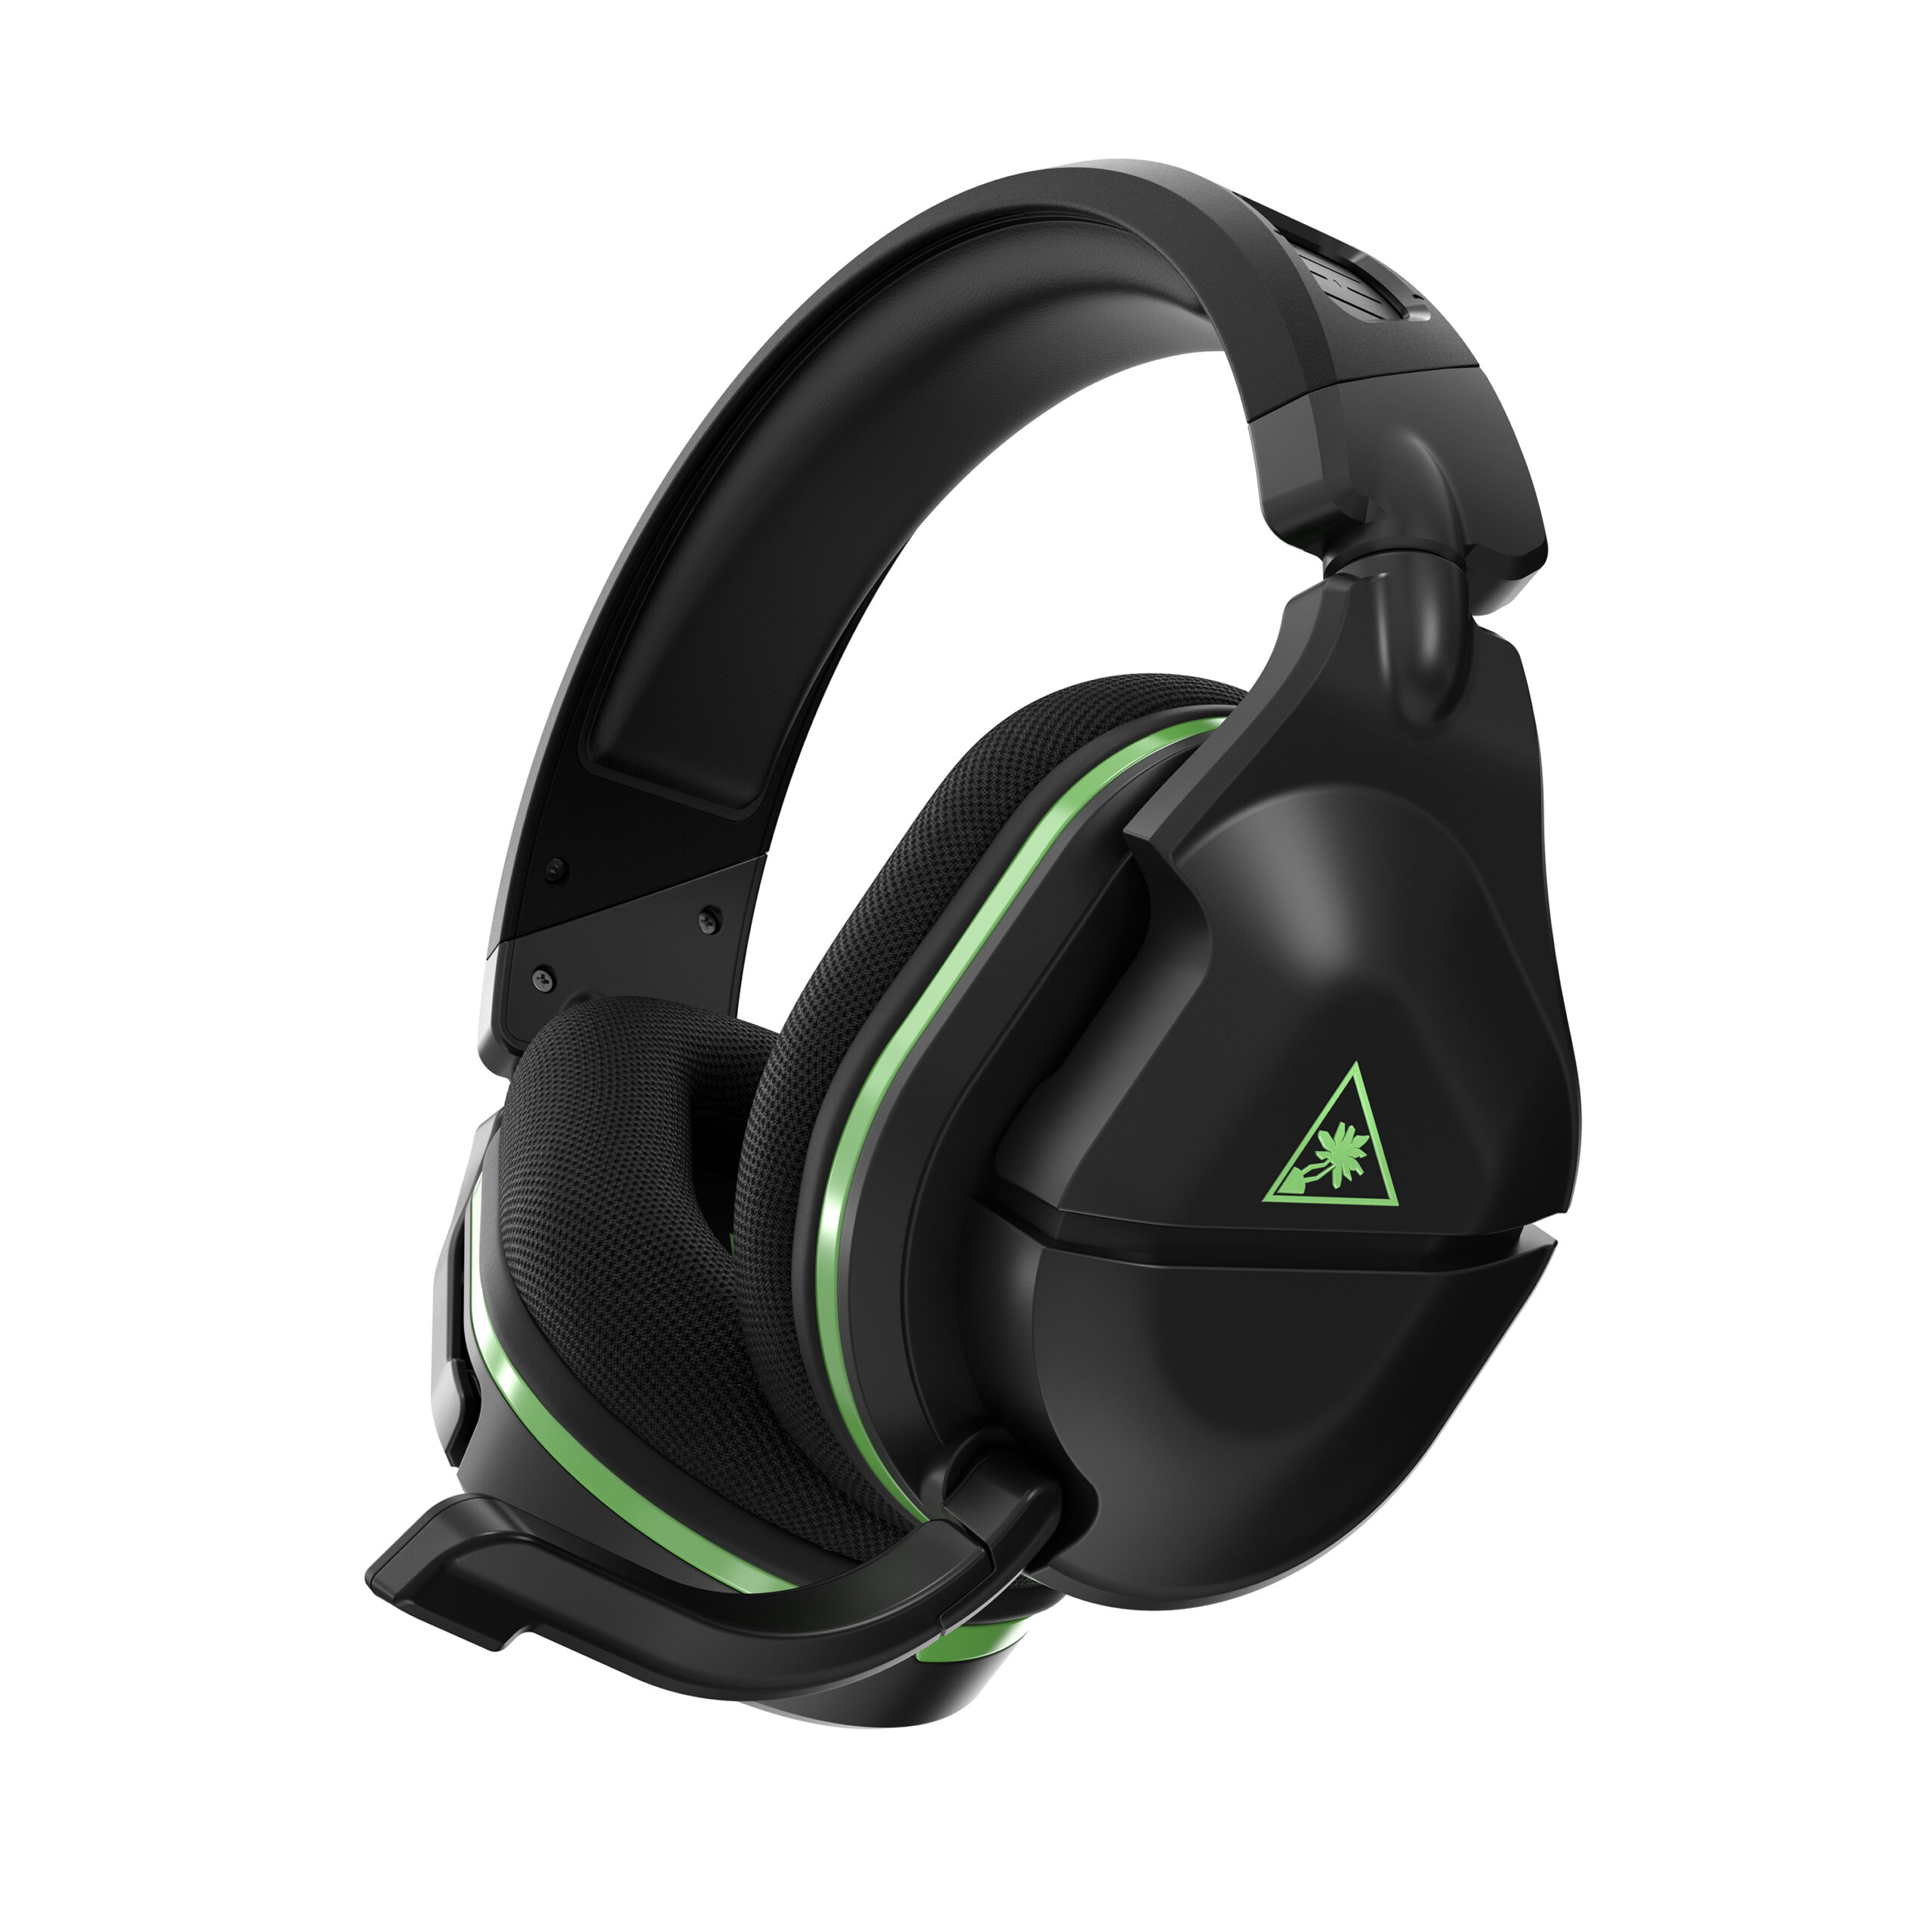 Headset Review: Turtle Beach Ear Force Stealth 600 Gen 2 (XBox Family of Devices)